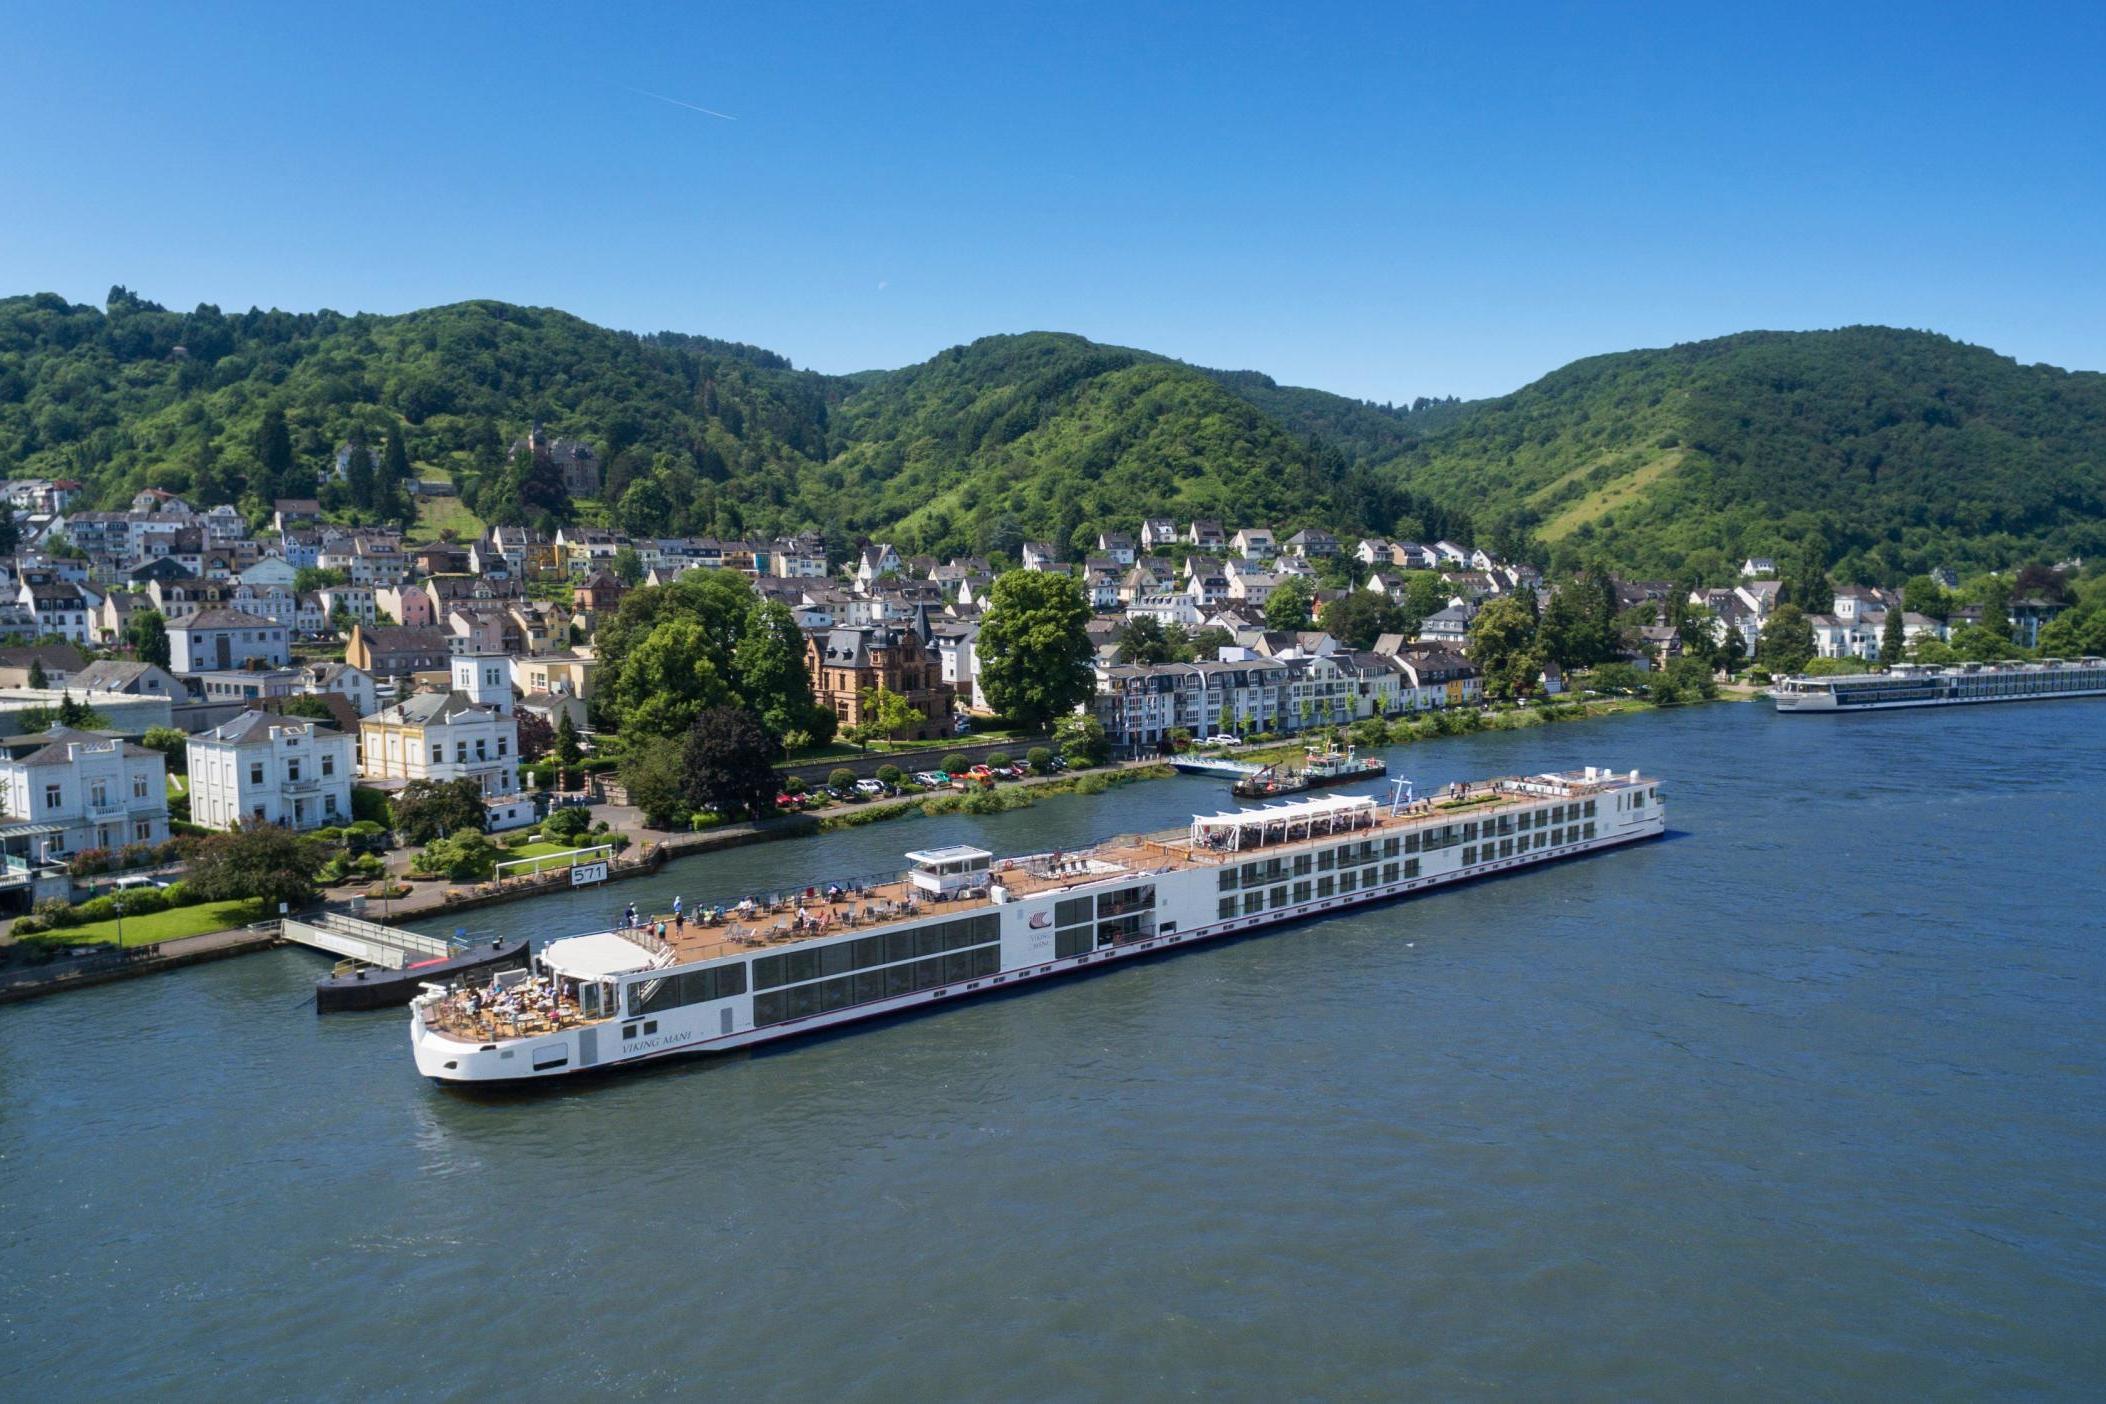 Viking Longship Mani passes the town of Boppard in the Middle Rhine Valley